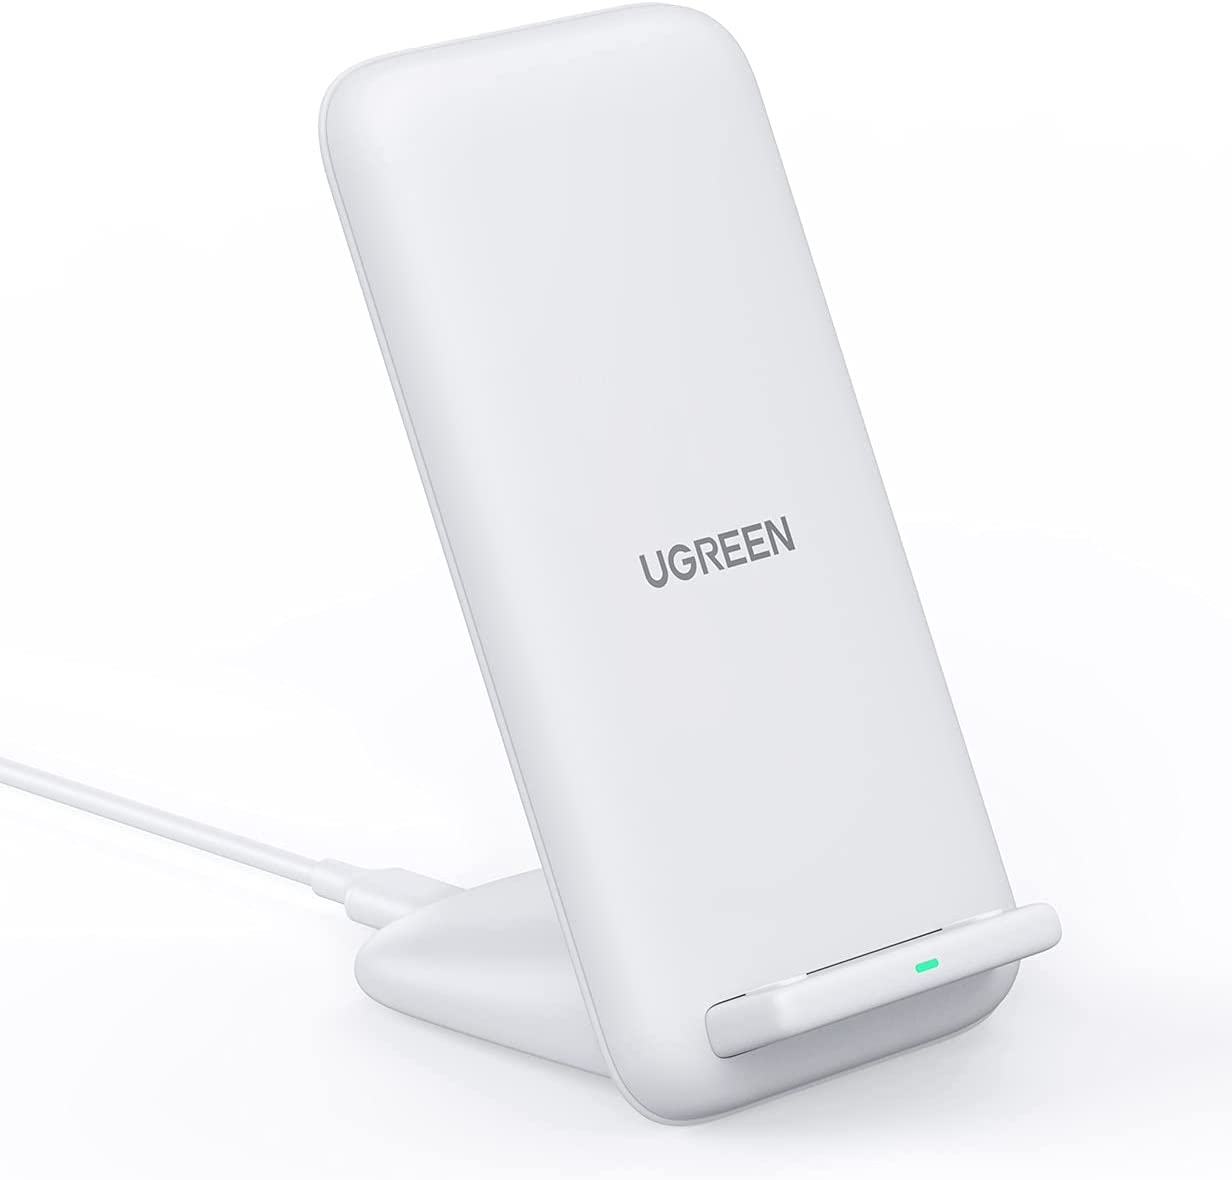 UGREEN 15W Qi Chargeur Induction Voiture Chargeu…